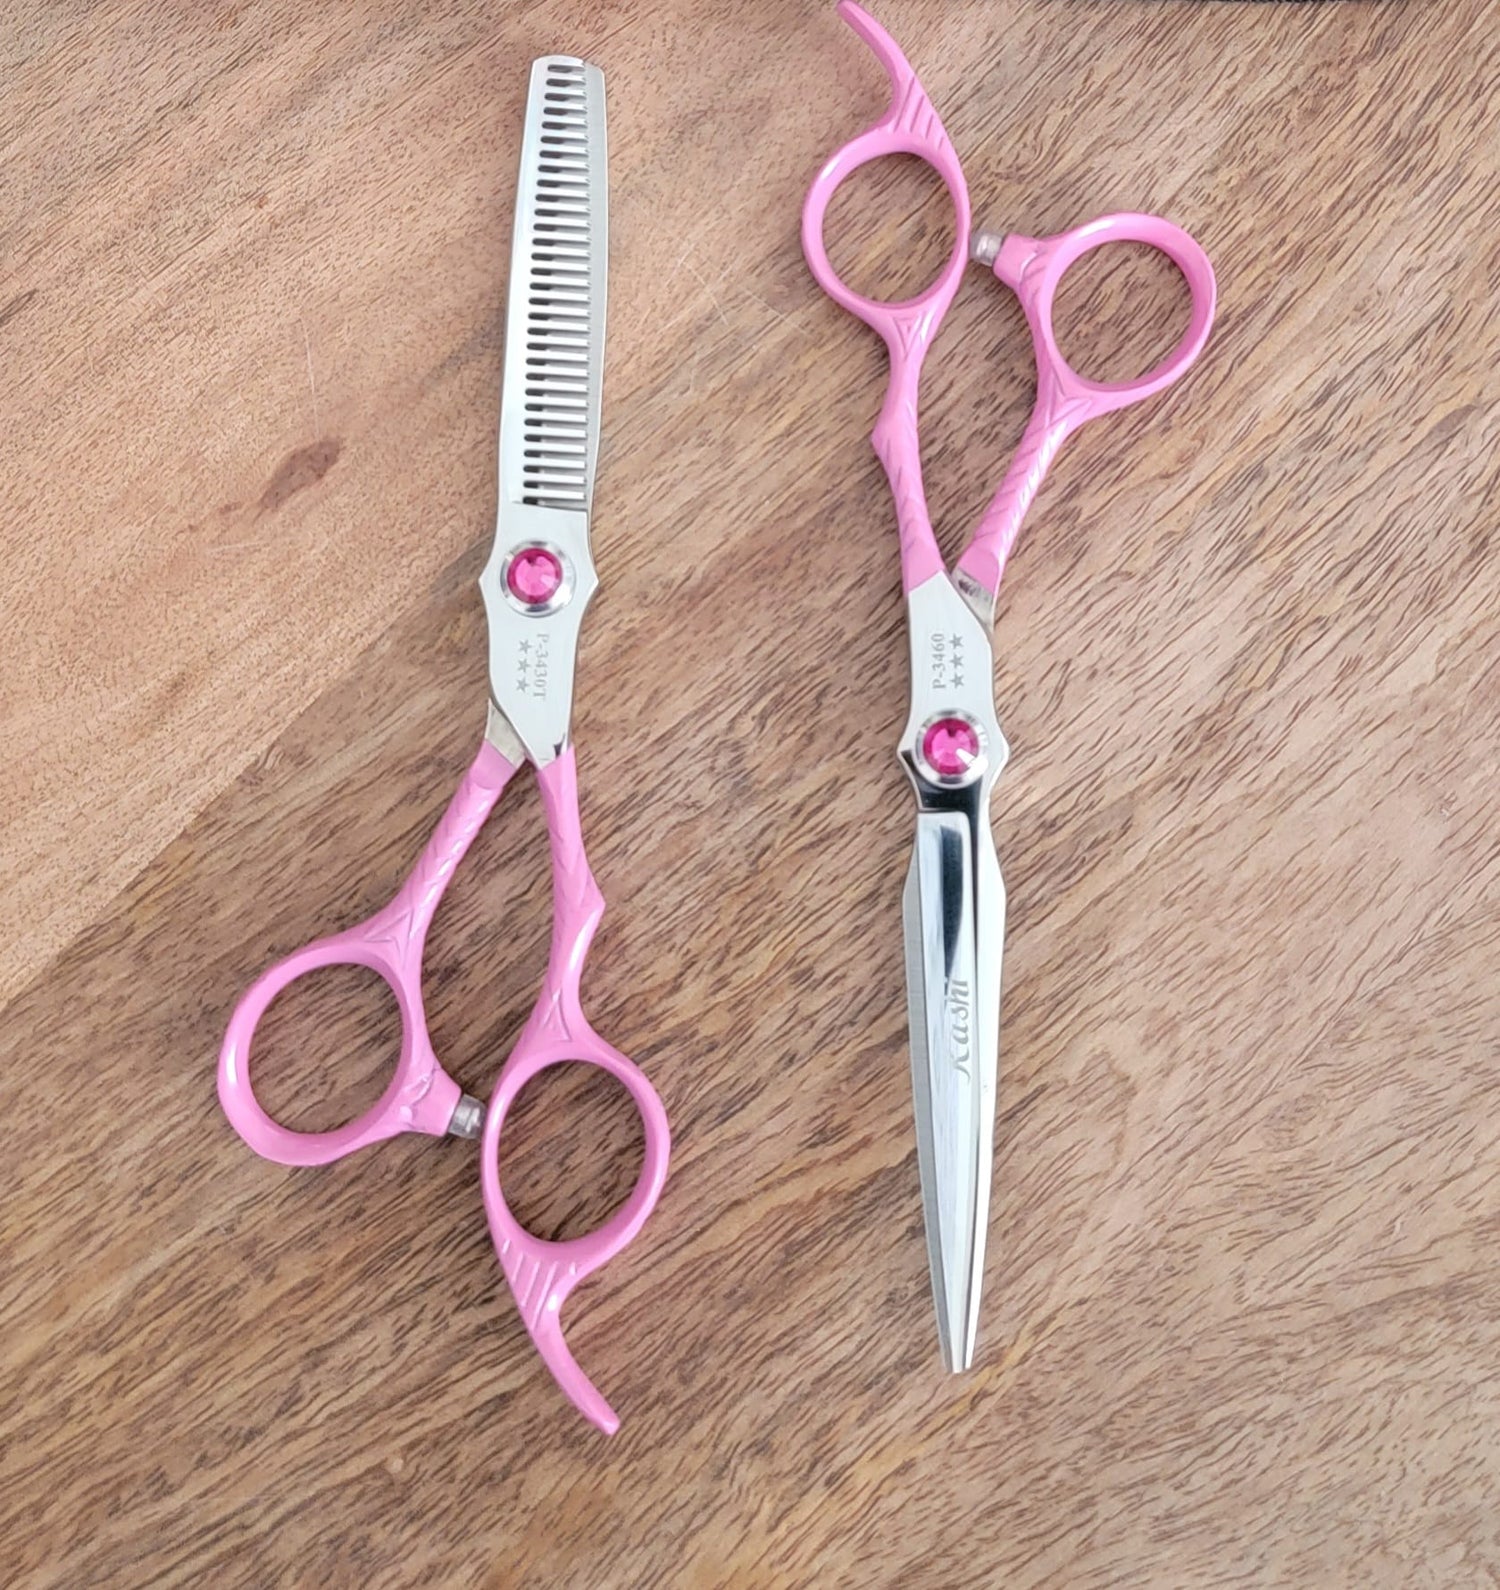 Kashi-shears-pink-color-japanese-steel-P-3460-P-3430T